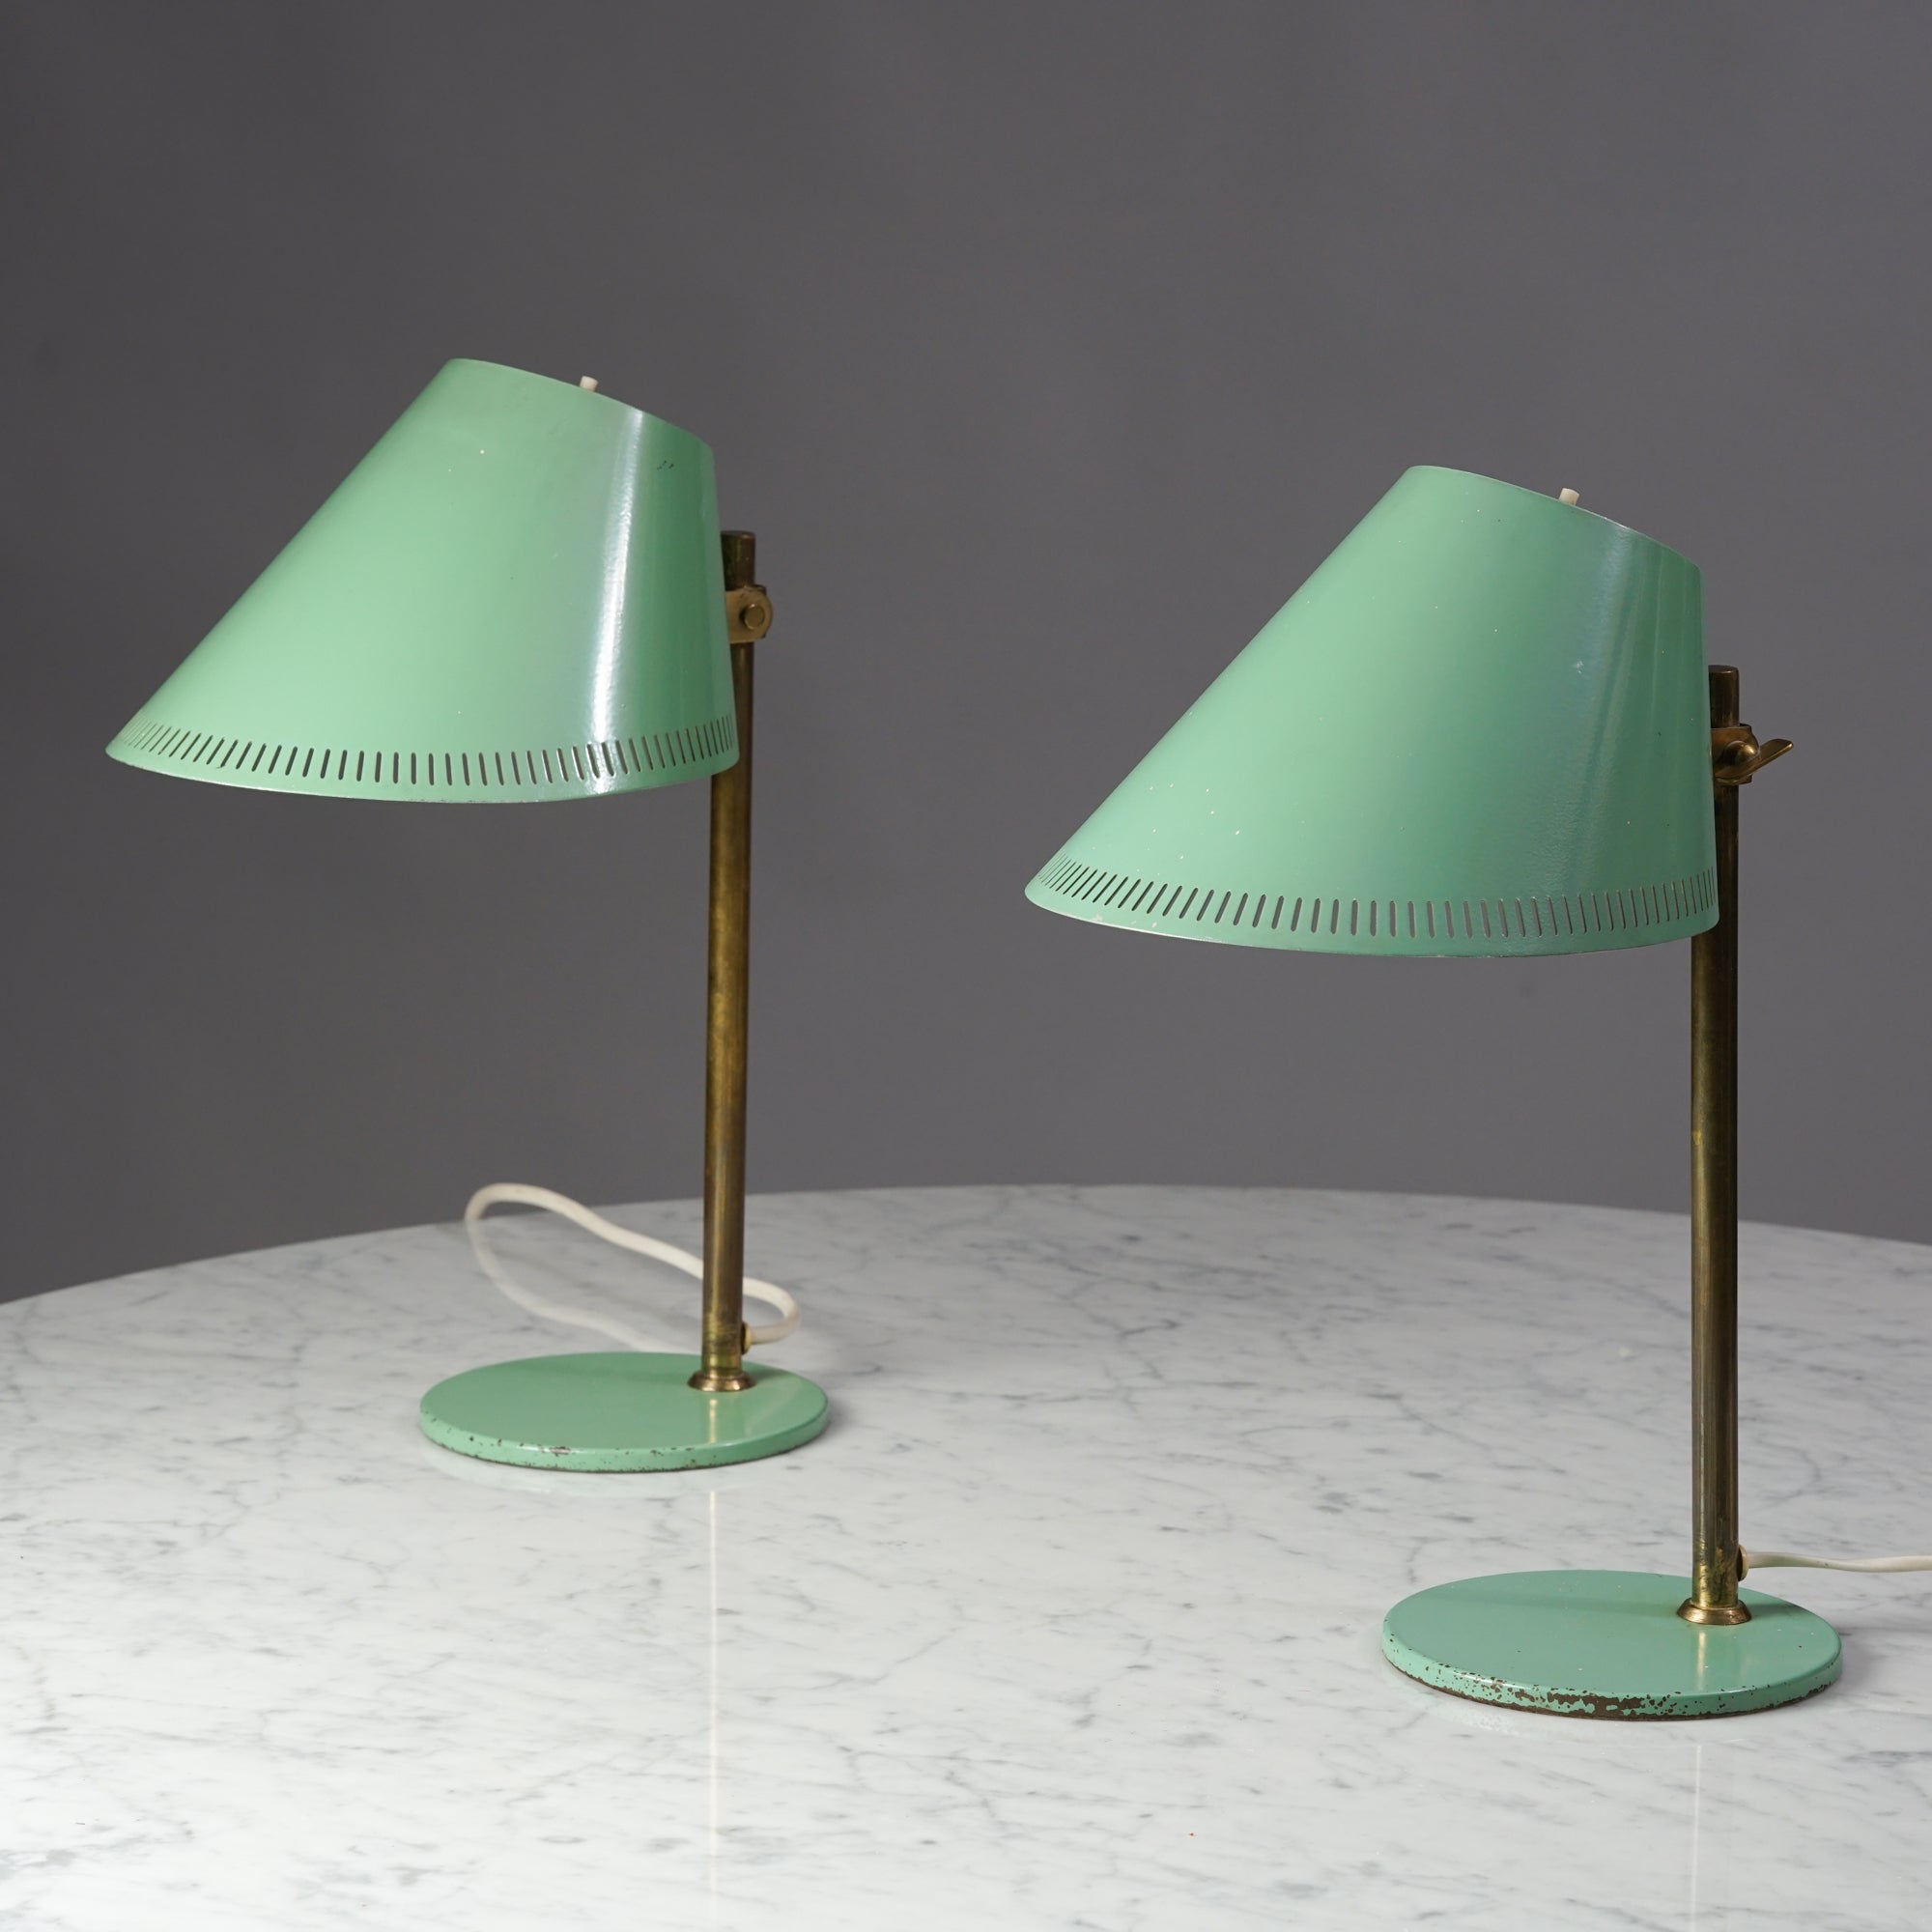 Set of '9227' Table lamps by Paavo Tynell for Taito Oy. Exceptionally rare and original green color. Marked Taito Oy / Idman. Produced in 1940s in Finland. This table lamp is one of the most iconic Tynell designs.

Beautiful patina.
 